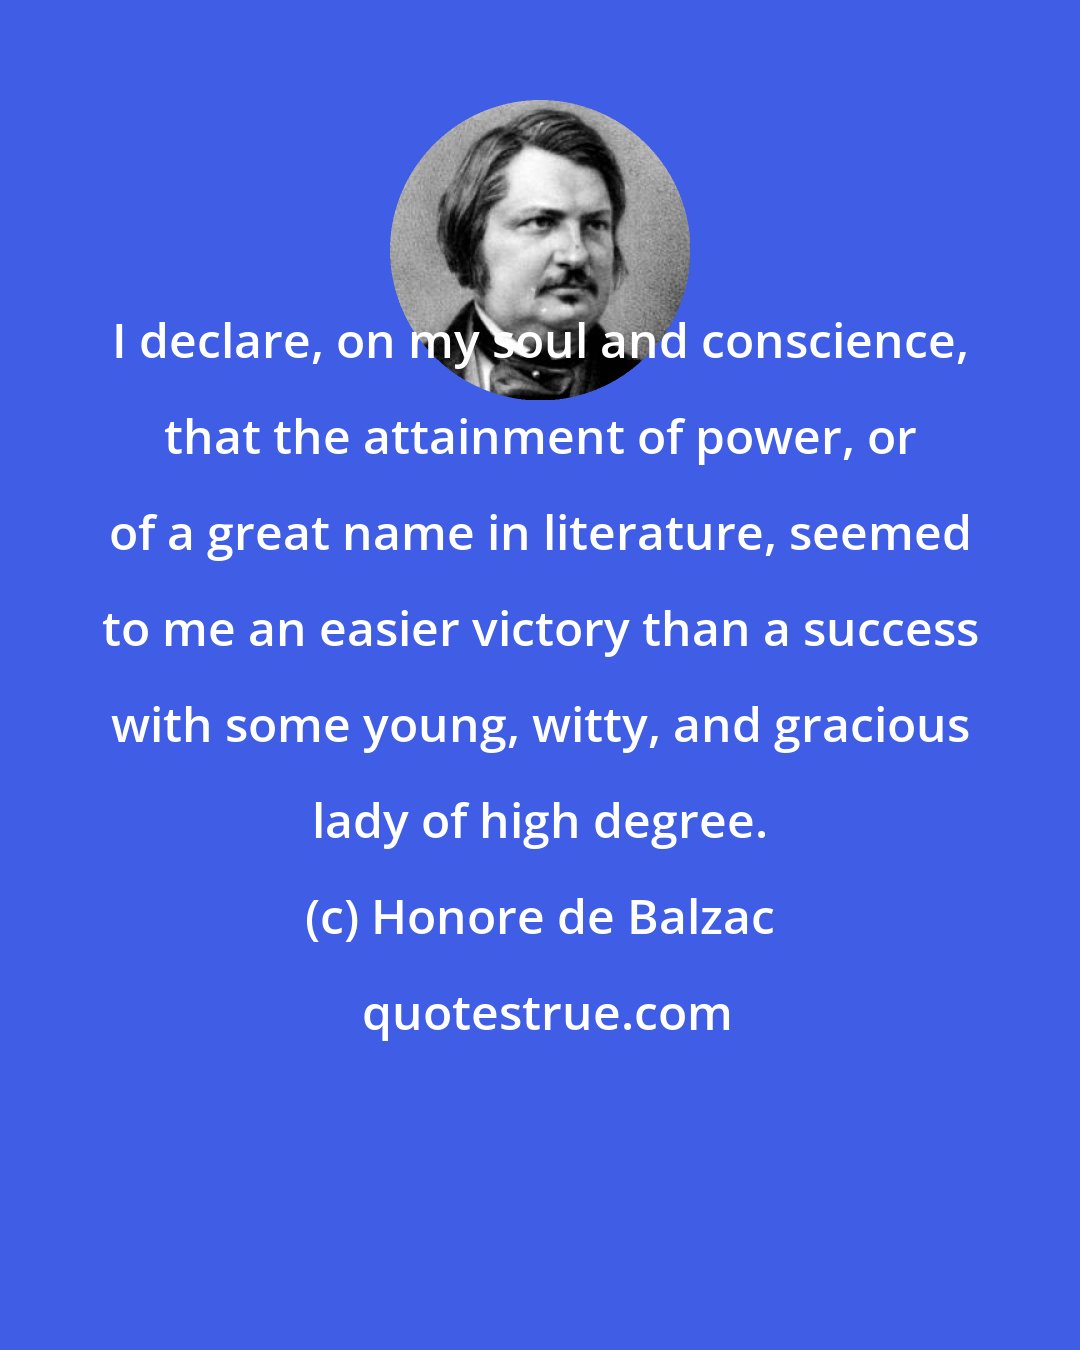 Honore de Balzac: I declare, on my soul and conscience, that the attainment of power, or of a great name in literature, seemed to me an easier victory than a success with some young, witty, and gracious lady of high degree.